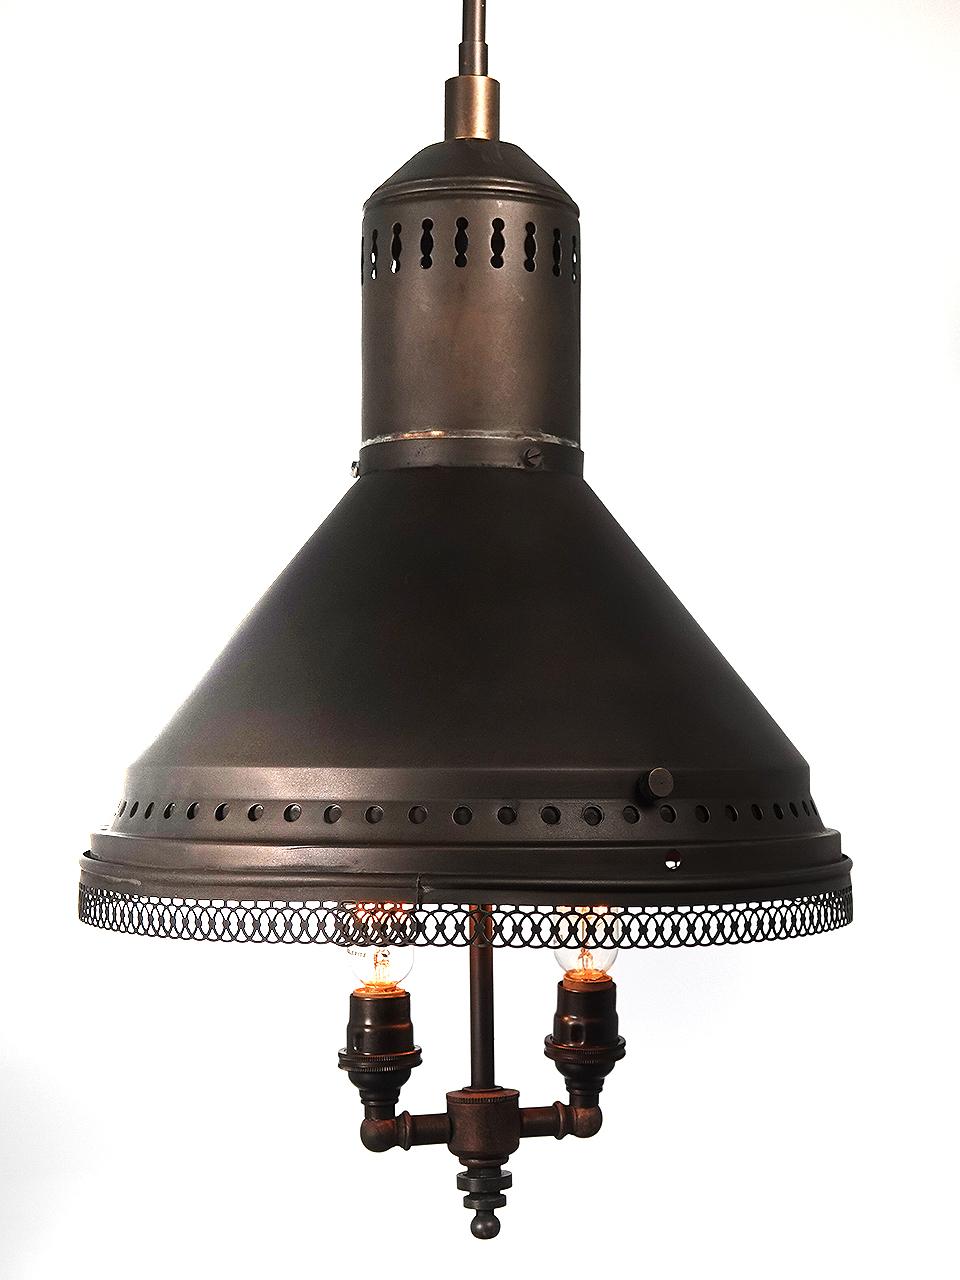 We love these mirrored reflector lamps and they are also a favorite of collectors. This example has a 12 inch diameter with 24 separate hand cut mirrors and a filigree bottom edge. It may have once been a gas or oil lamp but is now wired for 2 E12